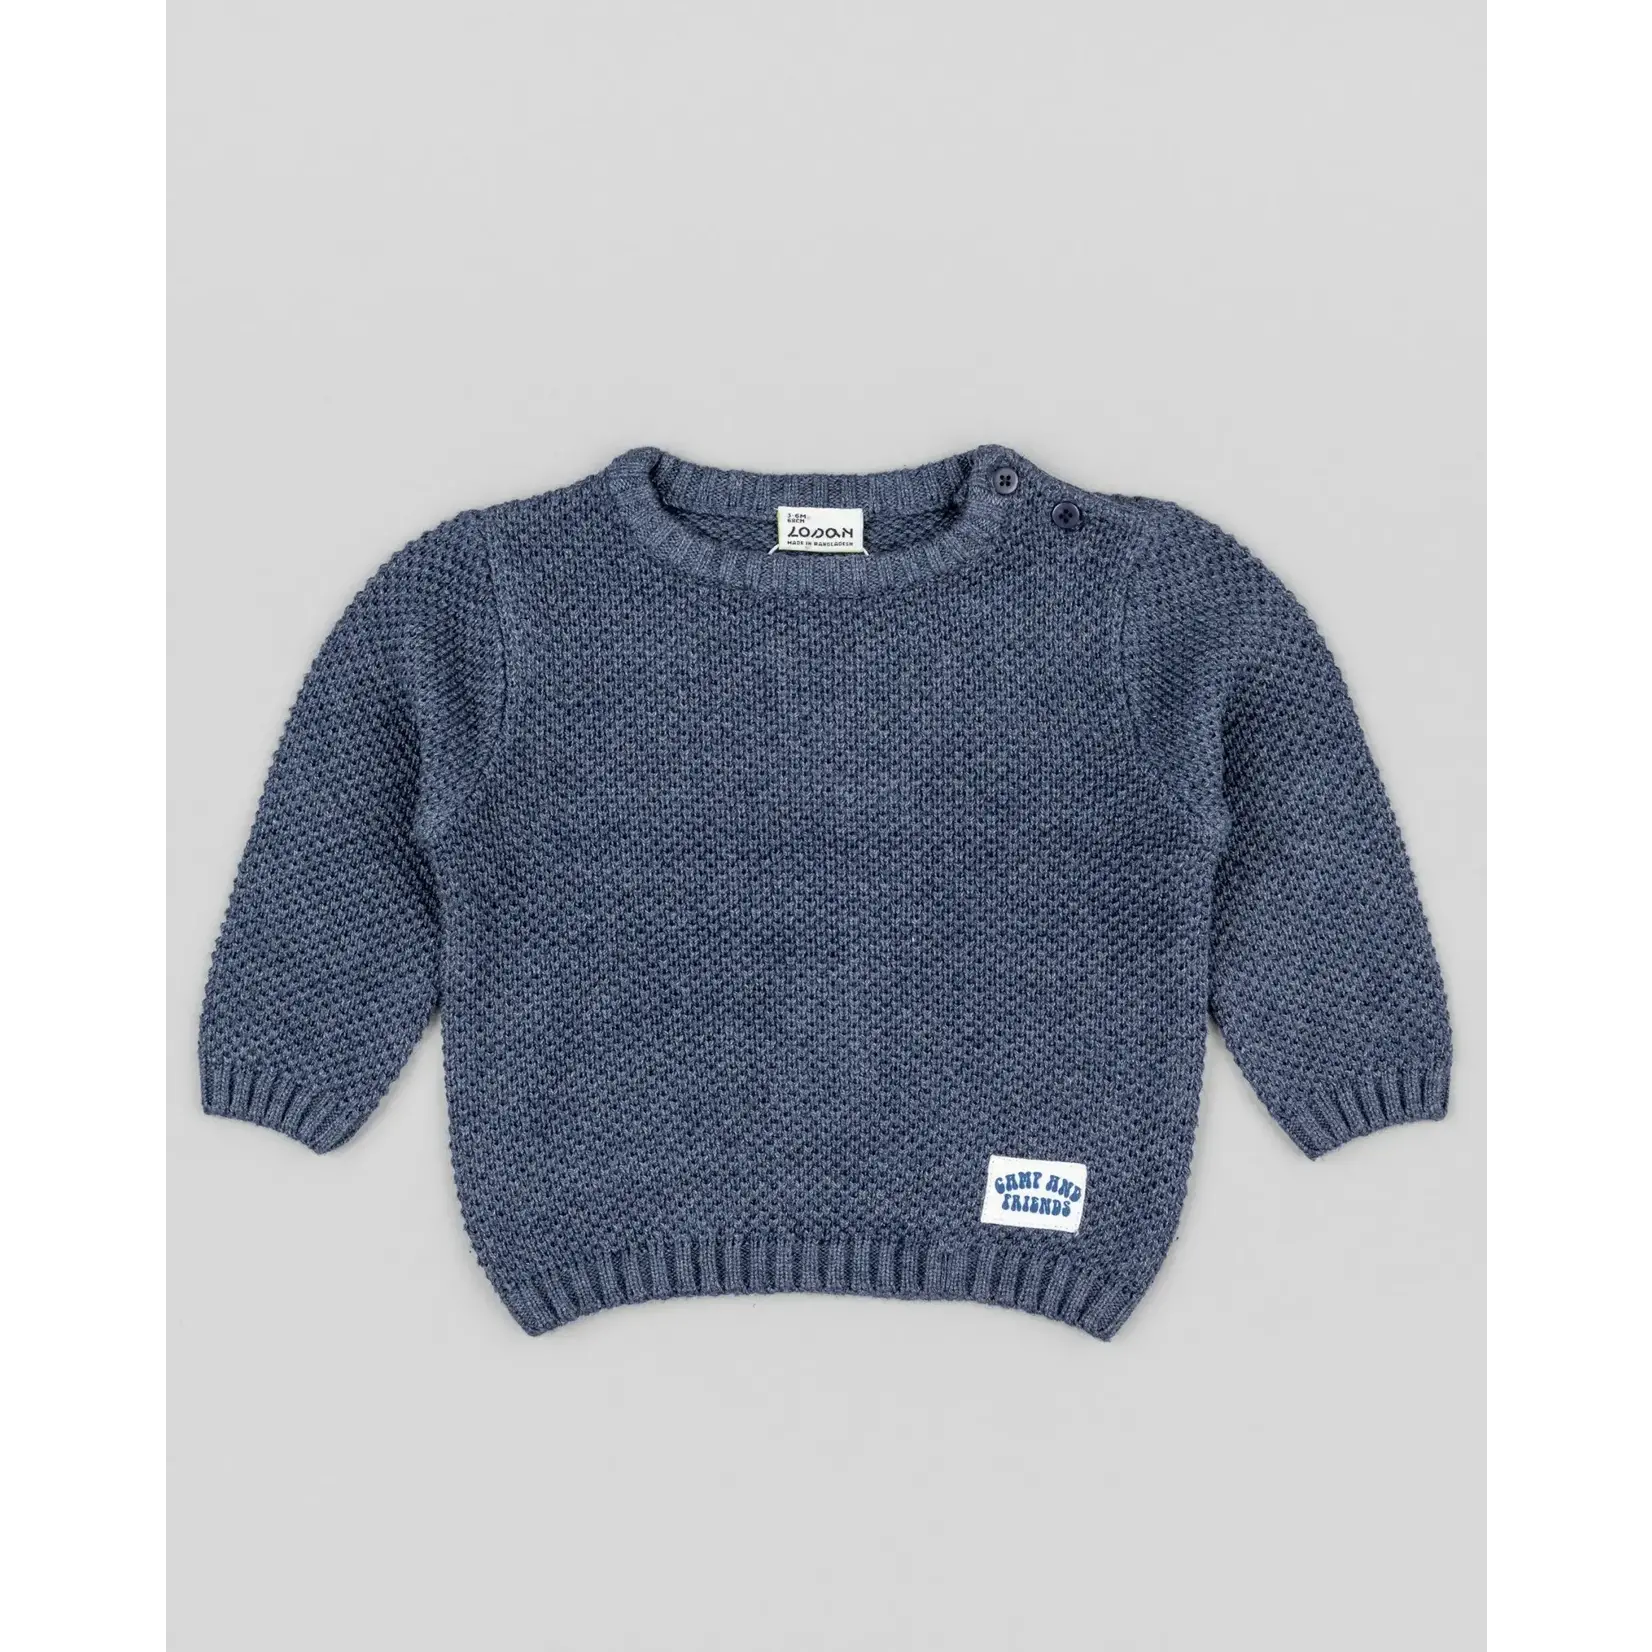 Losan LOSAN - Plain navy blue knitted sweater 'Camp and Friends'